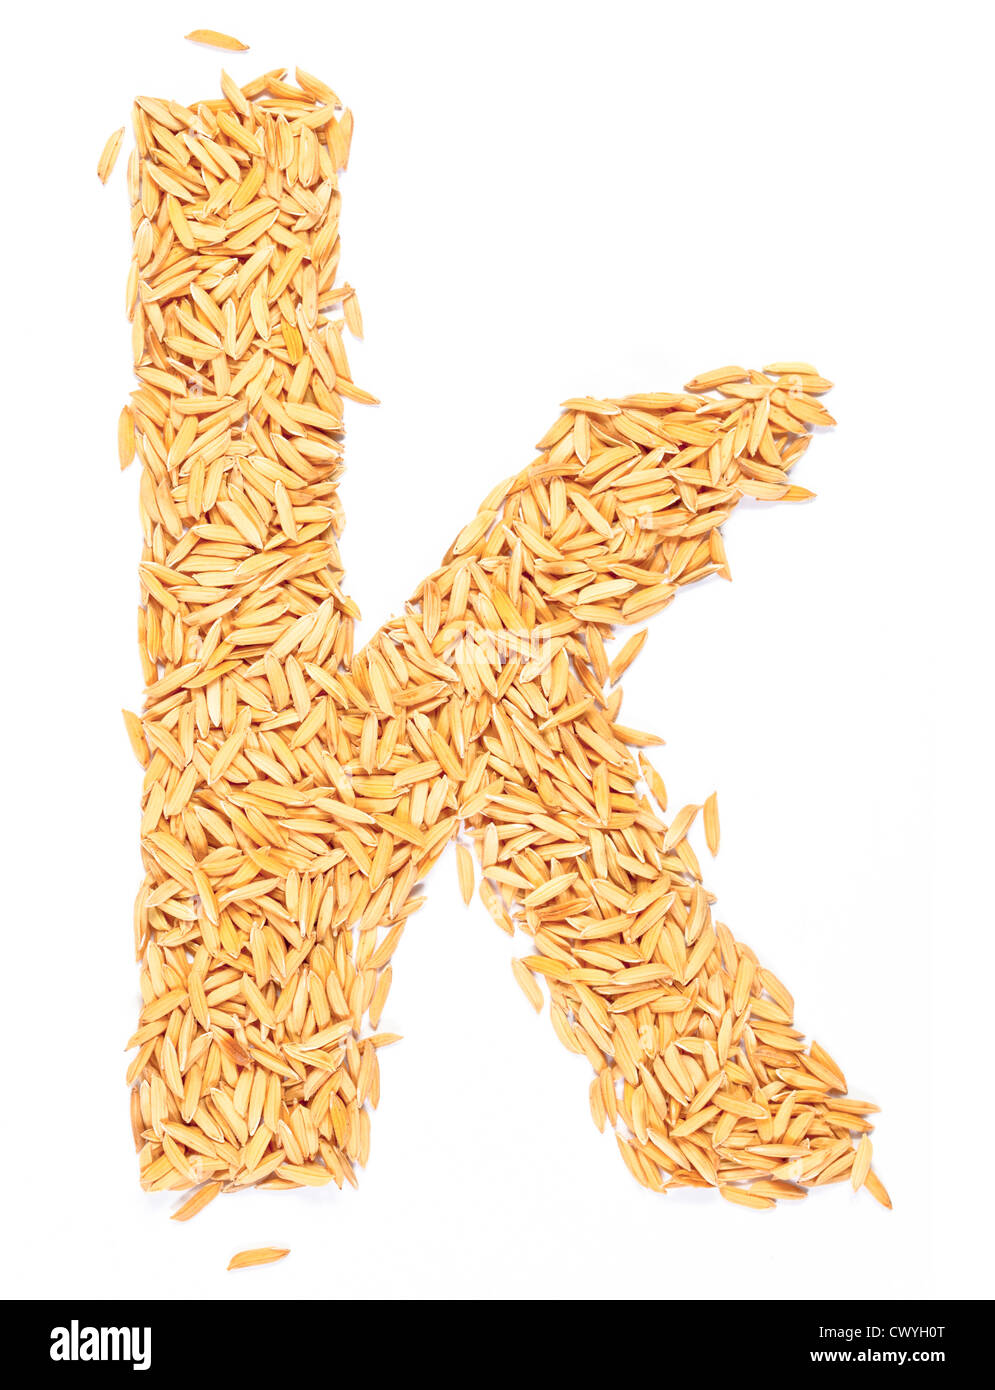 k, alphabet,Letter from Paddy rice on white Stock Photo